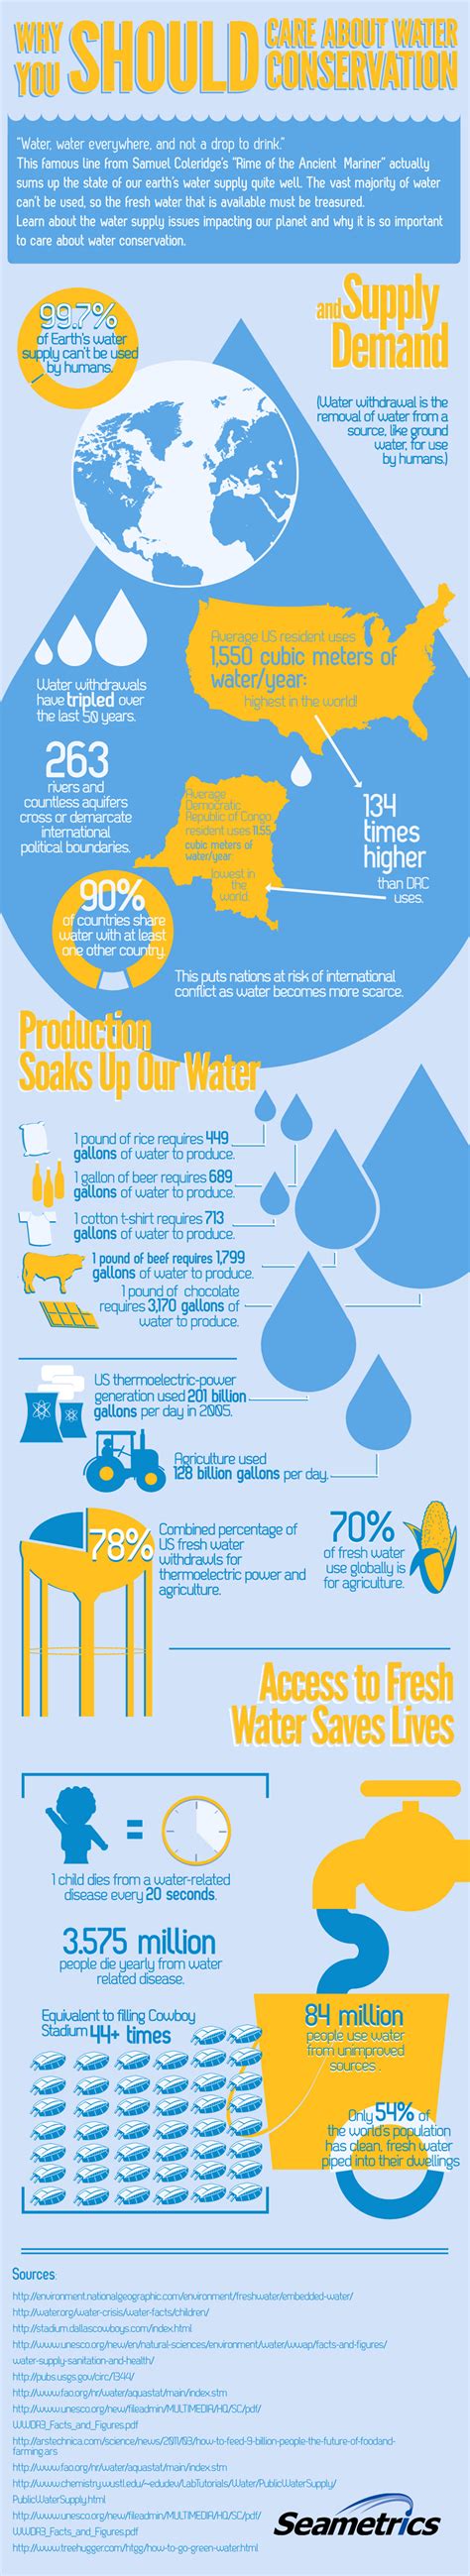 why you should care about water conservation [infographic] eat drink better